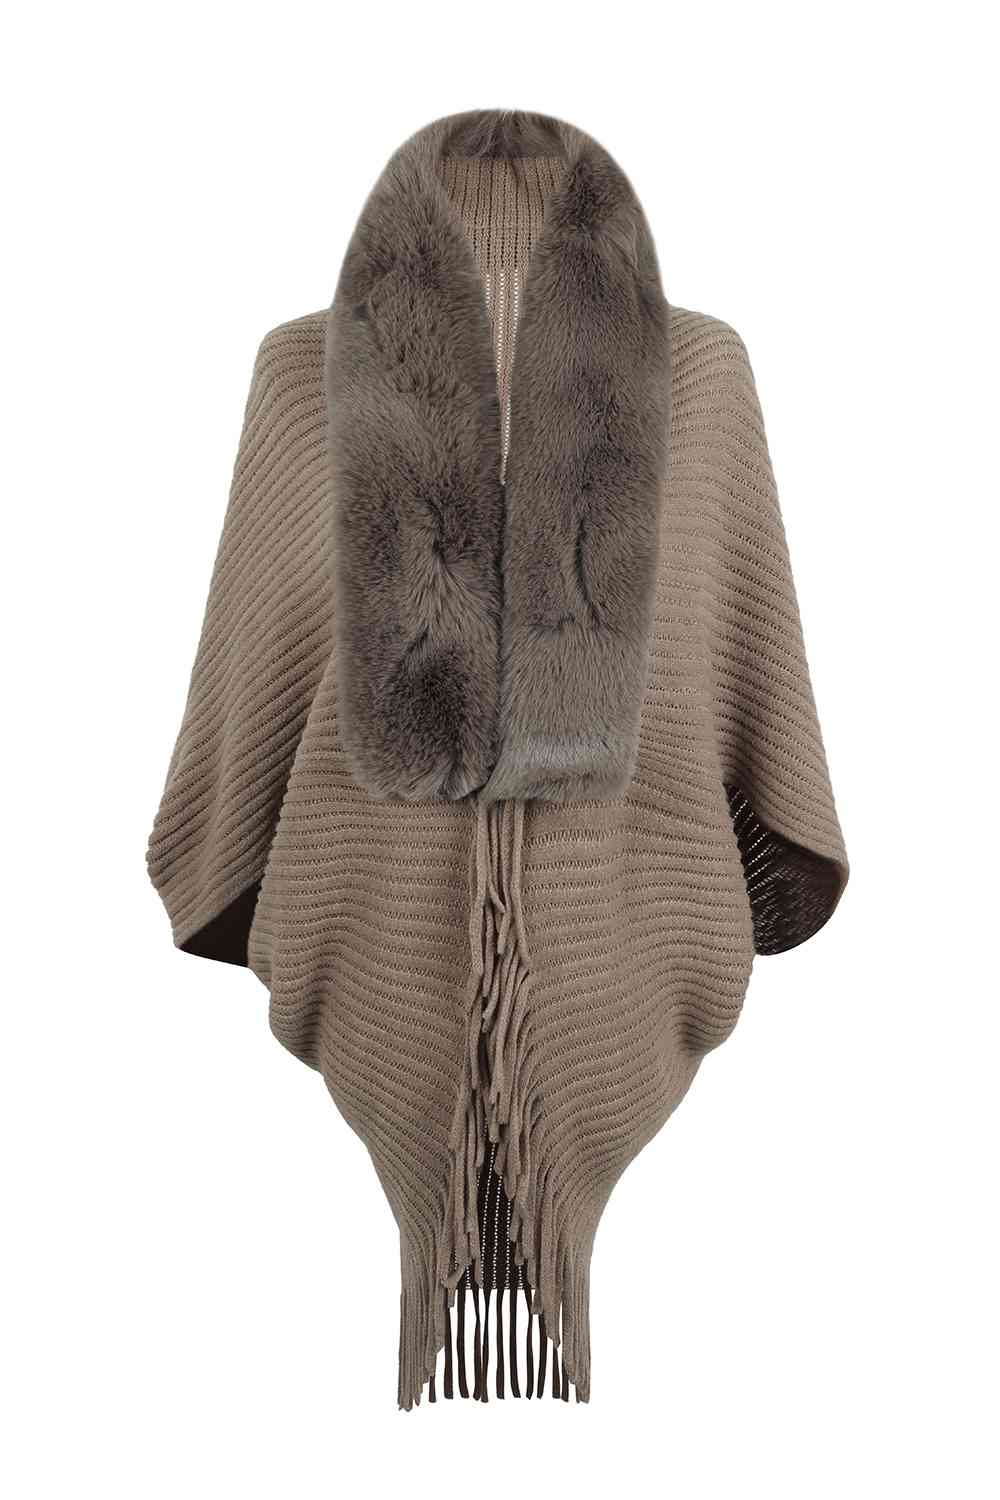 Chocolate open front poncho with fringe and faux fur trim